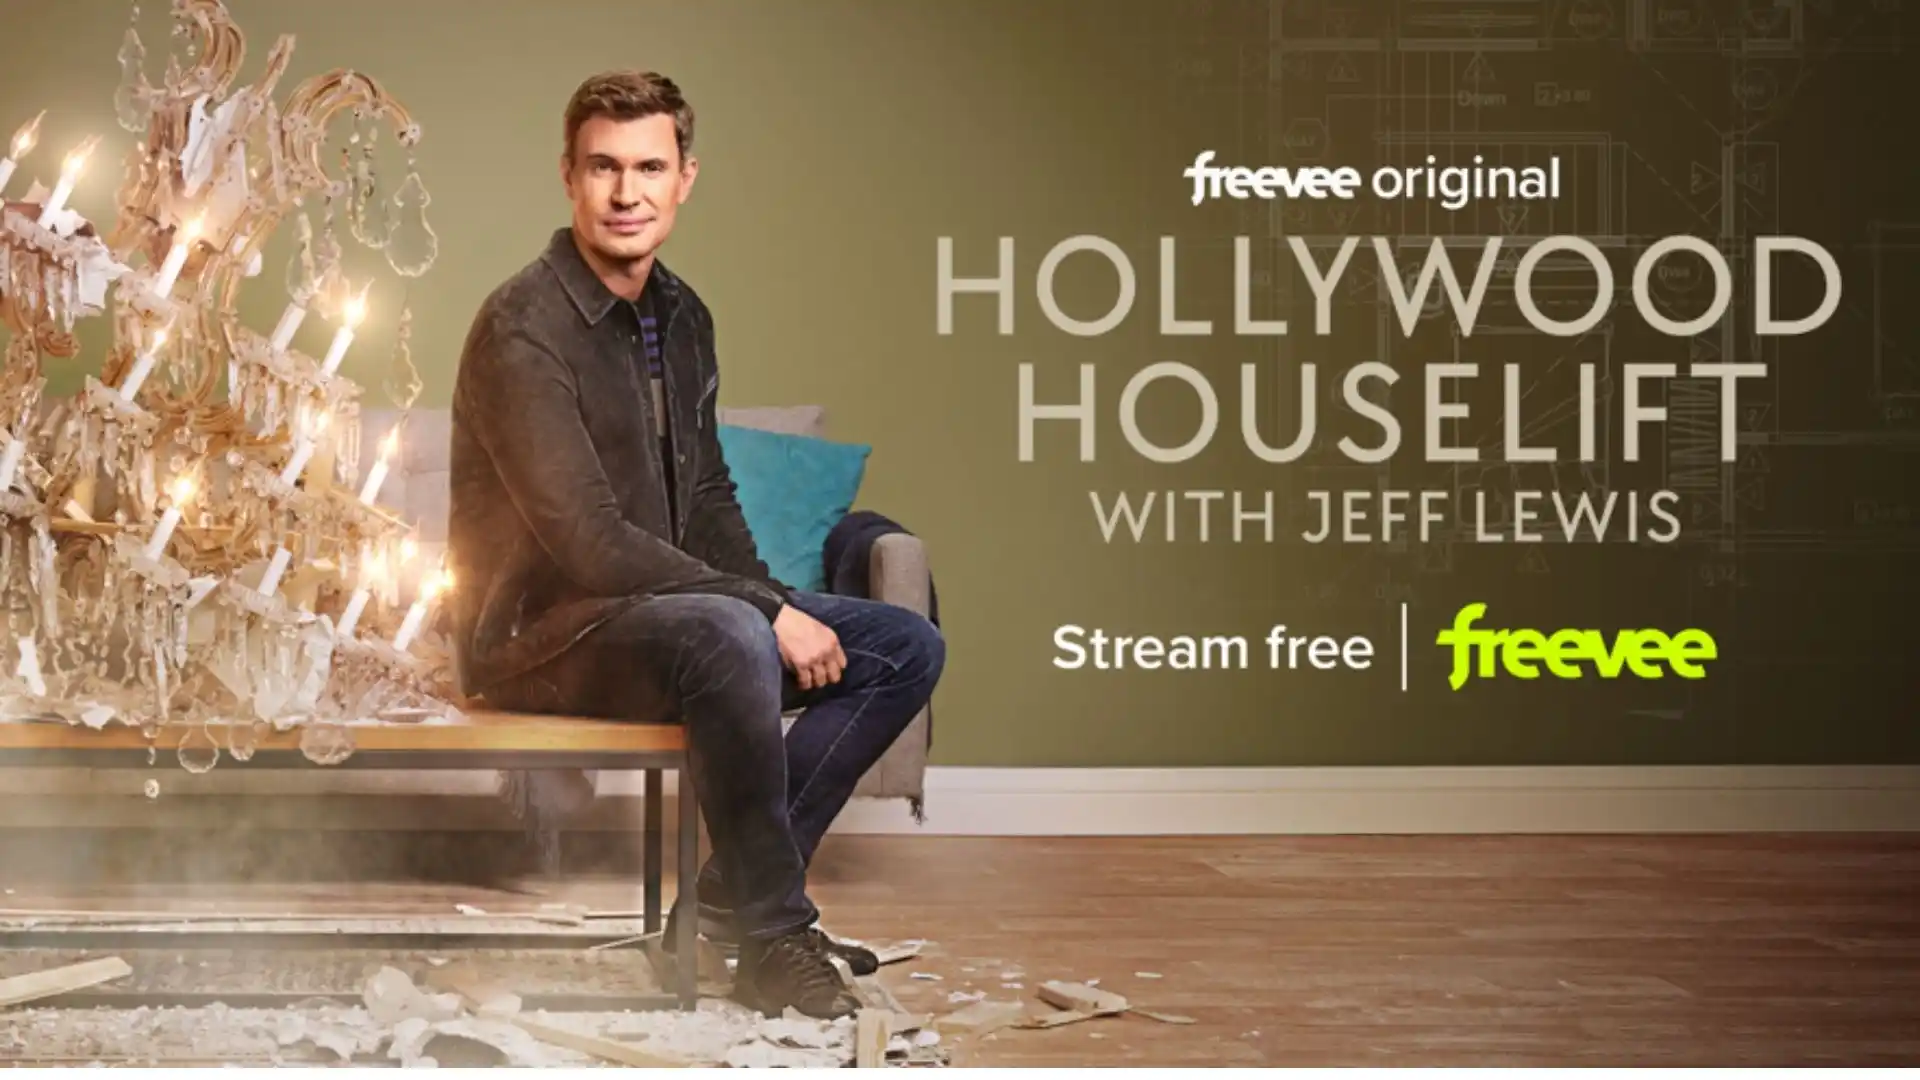 Hollywood Houselift with Jeff Lewis Parents Guide and age rating | 2022